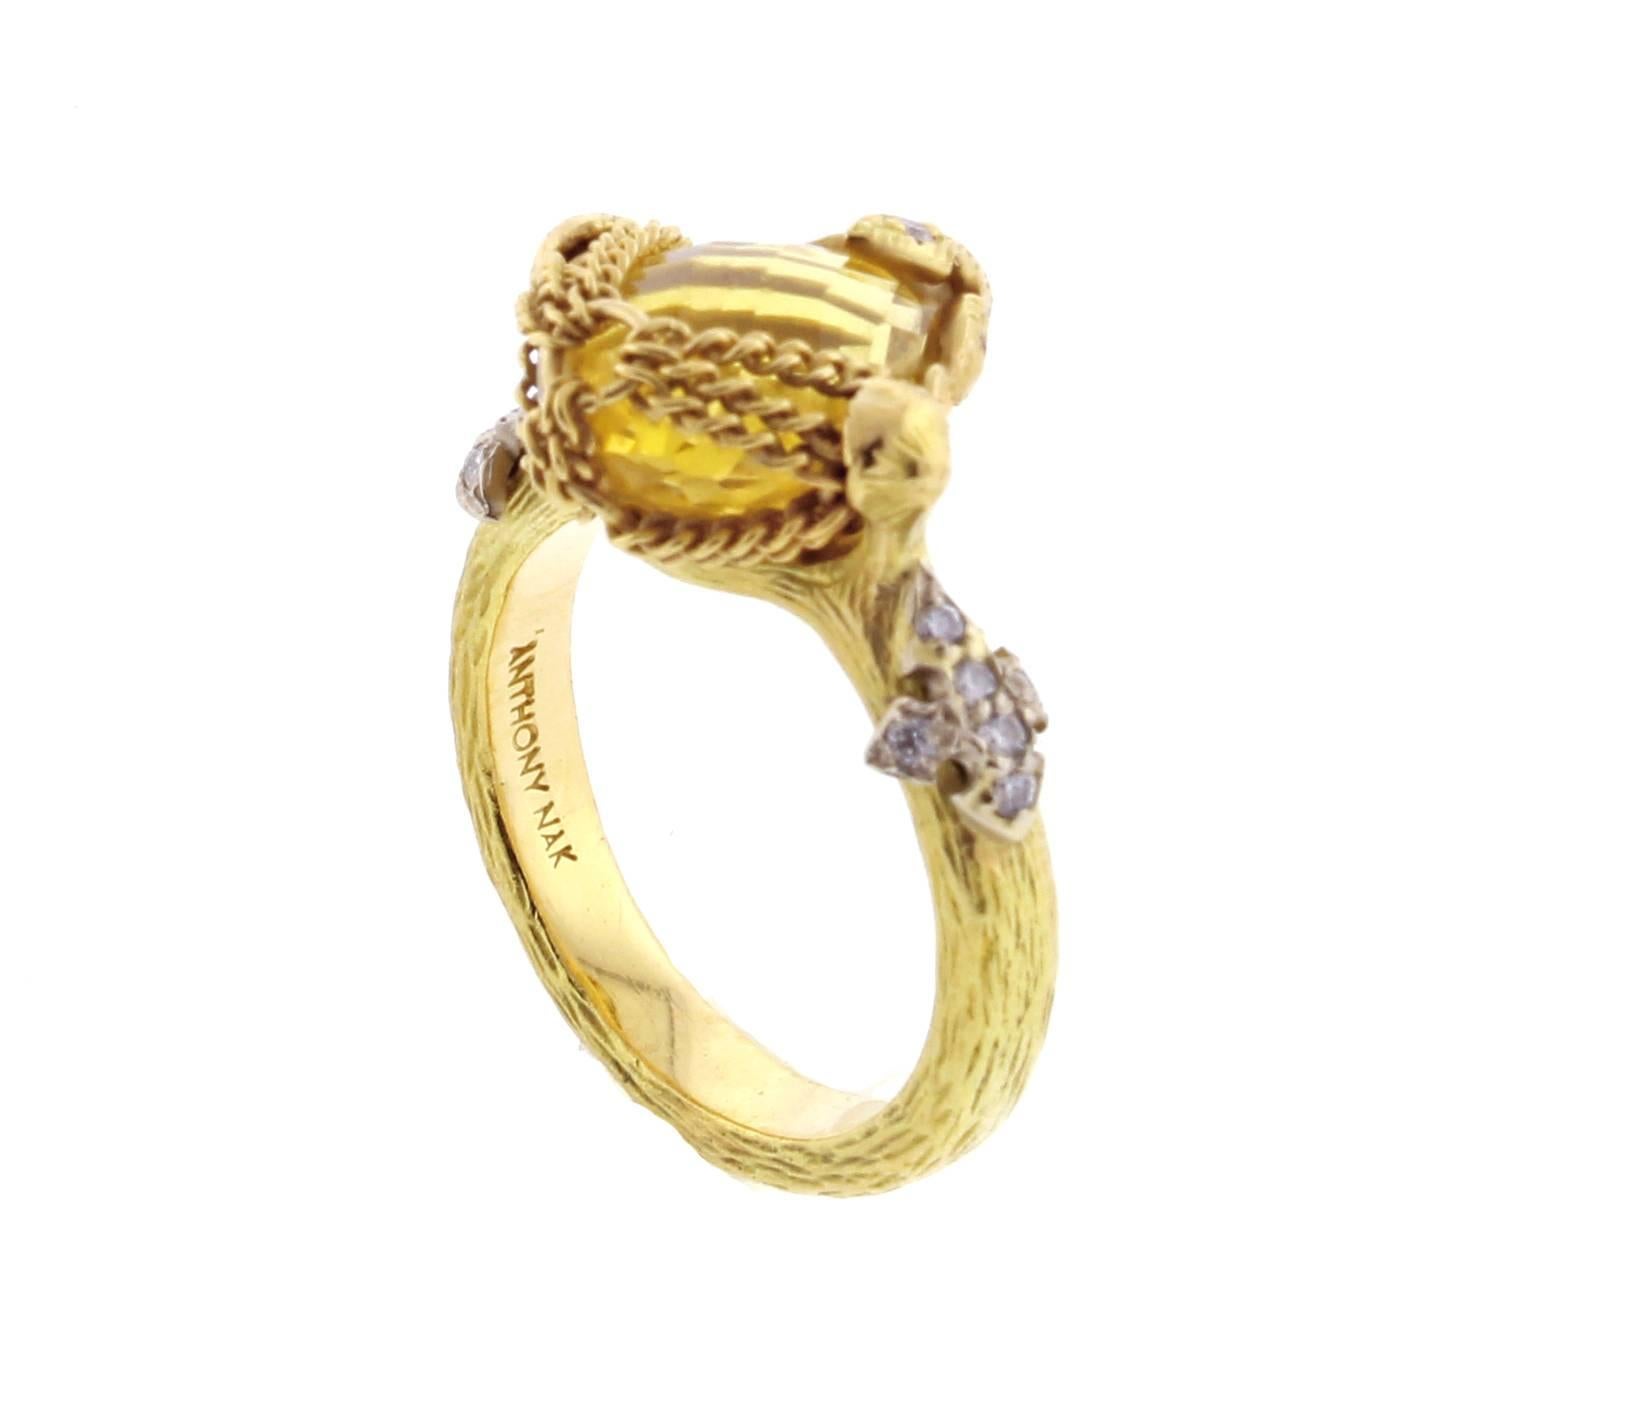 From World-famous jewelry designers Anthony Camargo and Nak Armstrong, these handmade Citrine and diamond ring. The rings is of a center pear-shape  briolette citrine with 13 round diamonds weighing .16. Size 6